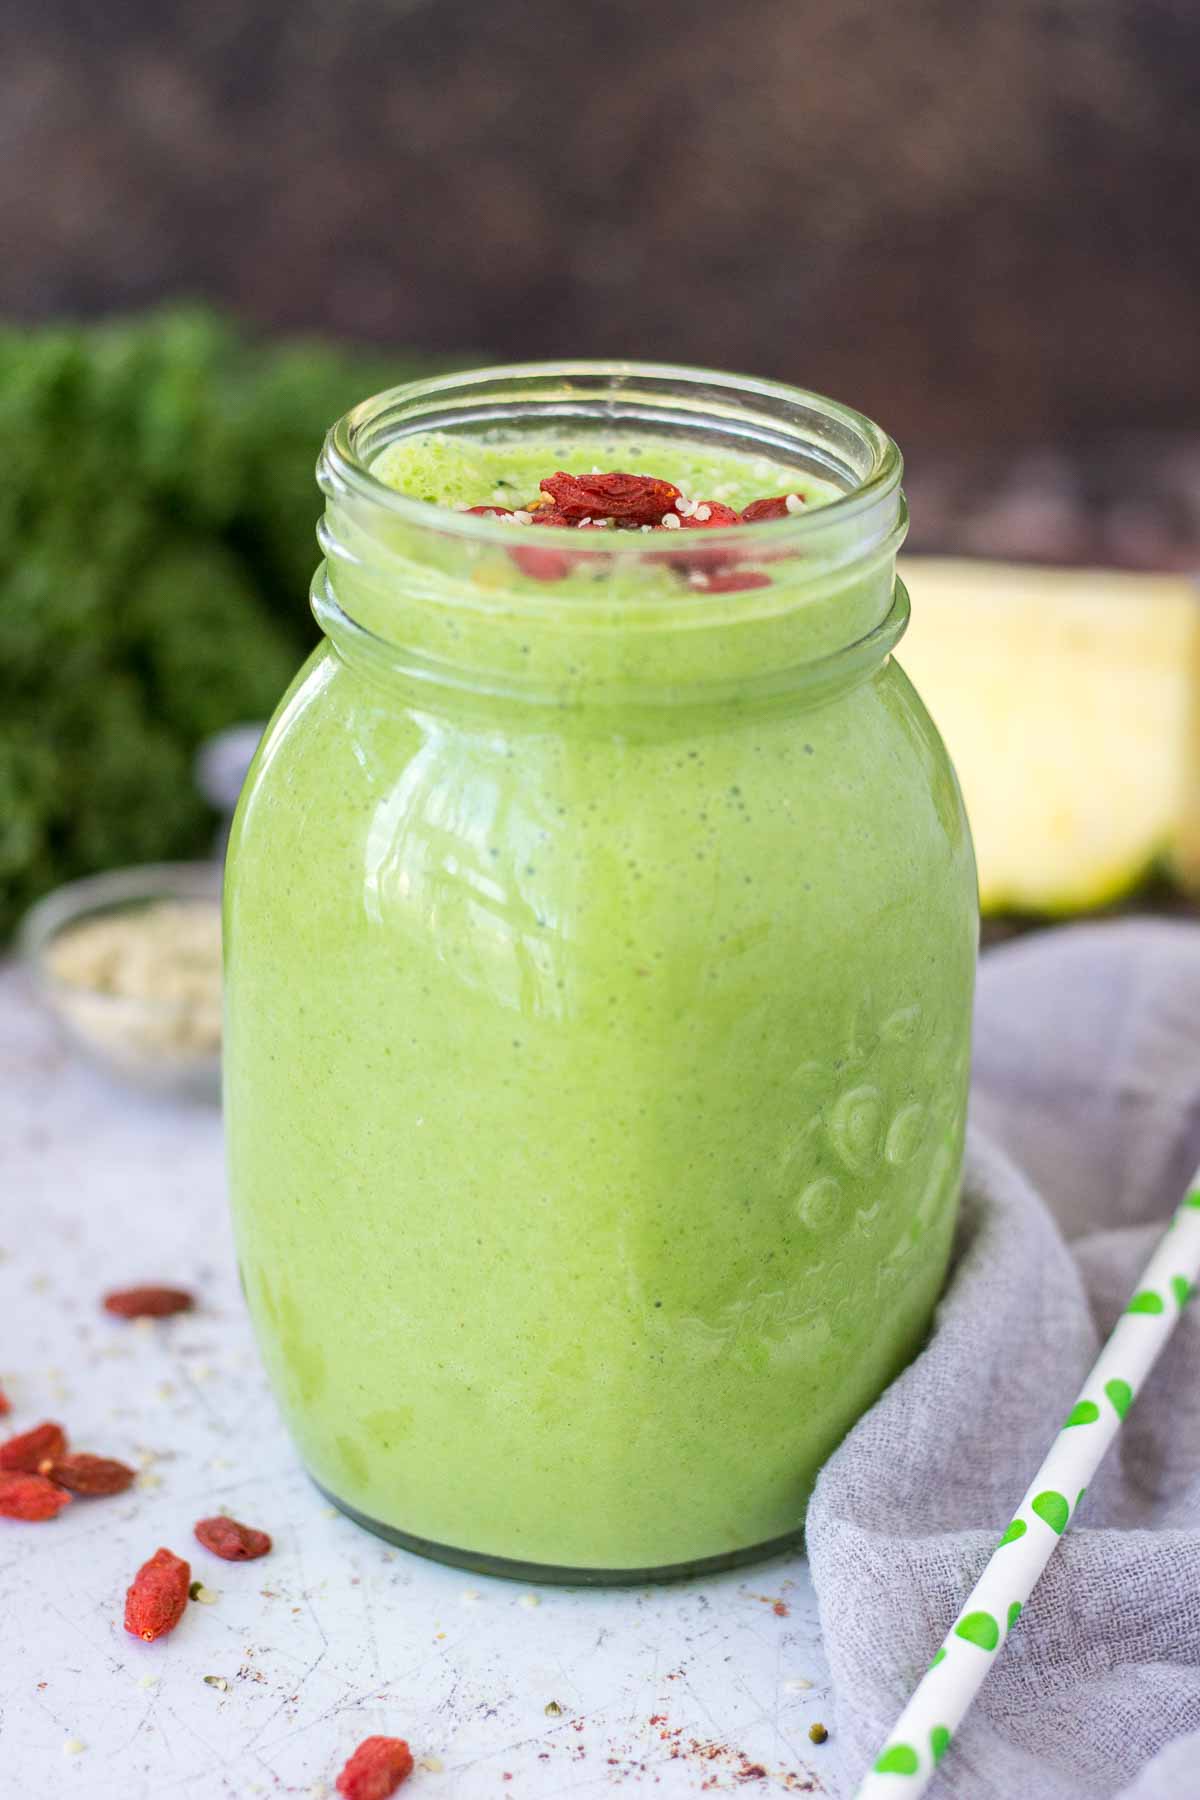 Kale Pineapple Smoothie served in a glass